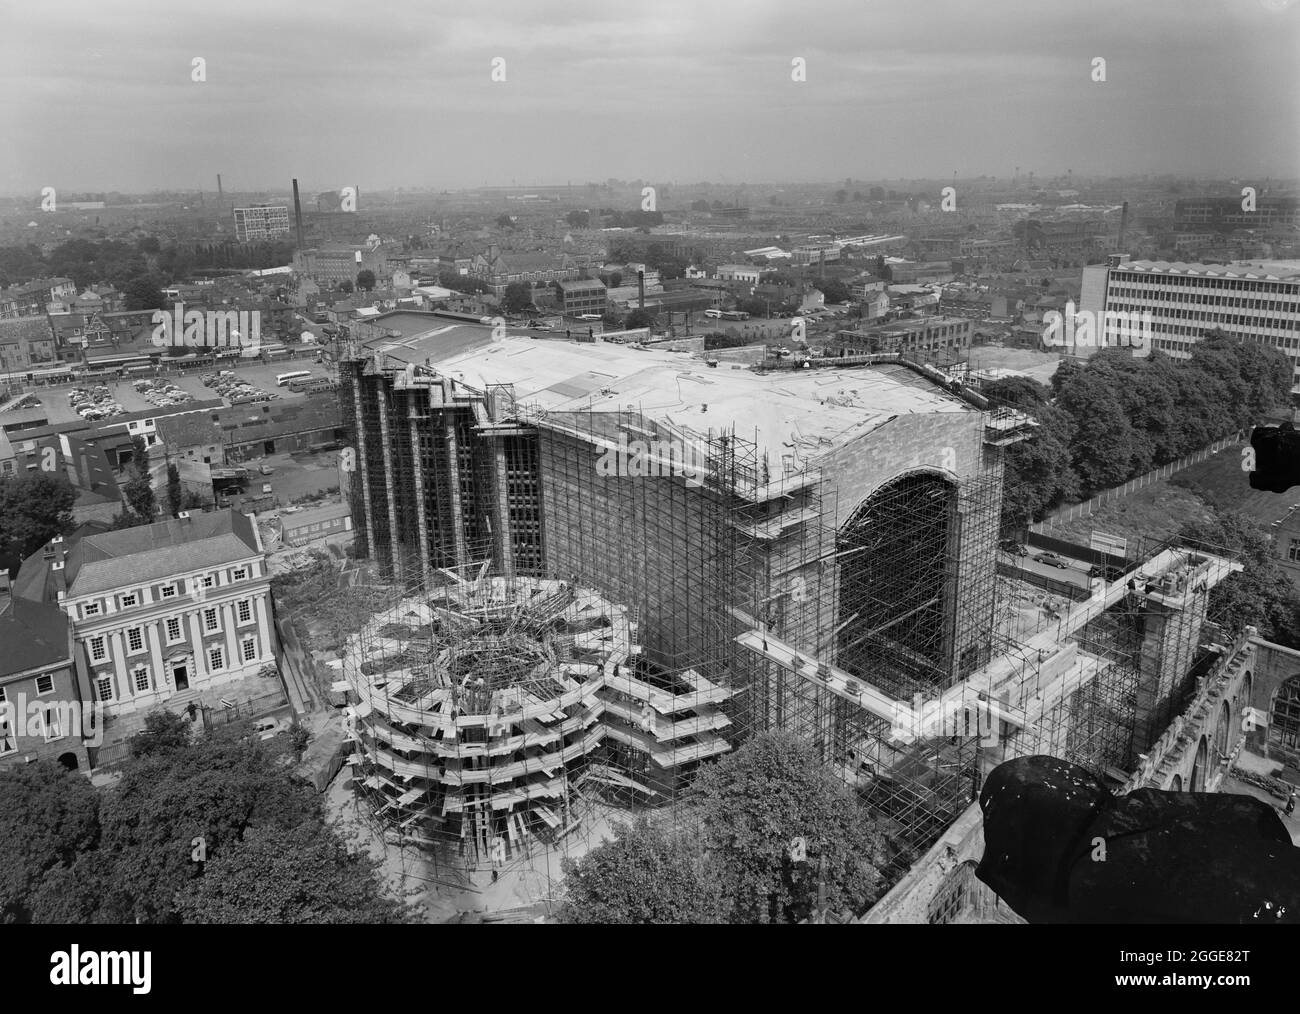 A view from the spire of the Cathedral Church of Saint Michael, looking in a north-east direction over the construction site of the new Coventry Cathedral, showing work on the roof and the construction of the Chapel of Unity on the left of the foreground. Construction of the new cathedral took place between the mid-1950s and 1962 with the foundation laying ceremony being carried out by Queen Elizabeth II on 23 March 1956. This photograph was taken to show the progress of the construction. Stock Photo